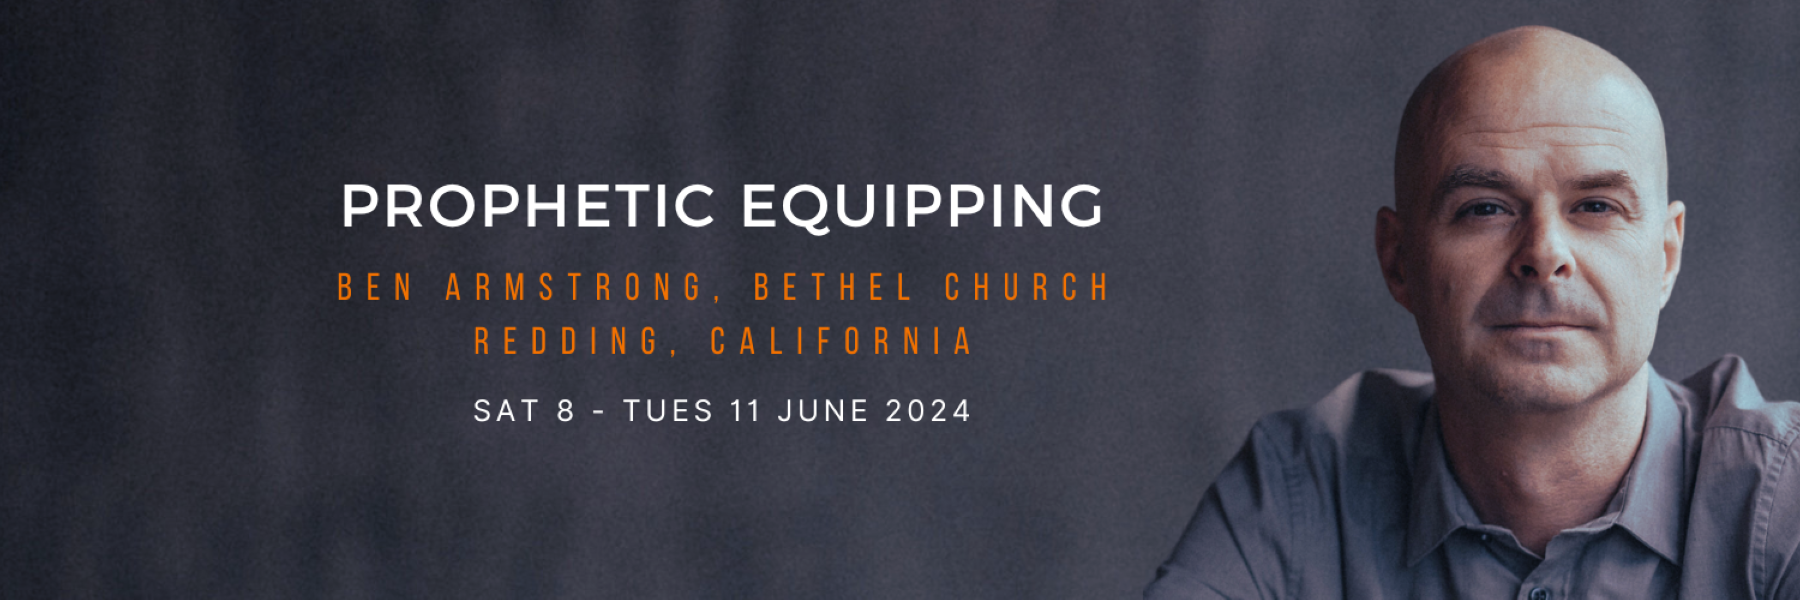 Prophetic Equipping with Ben Armstrong